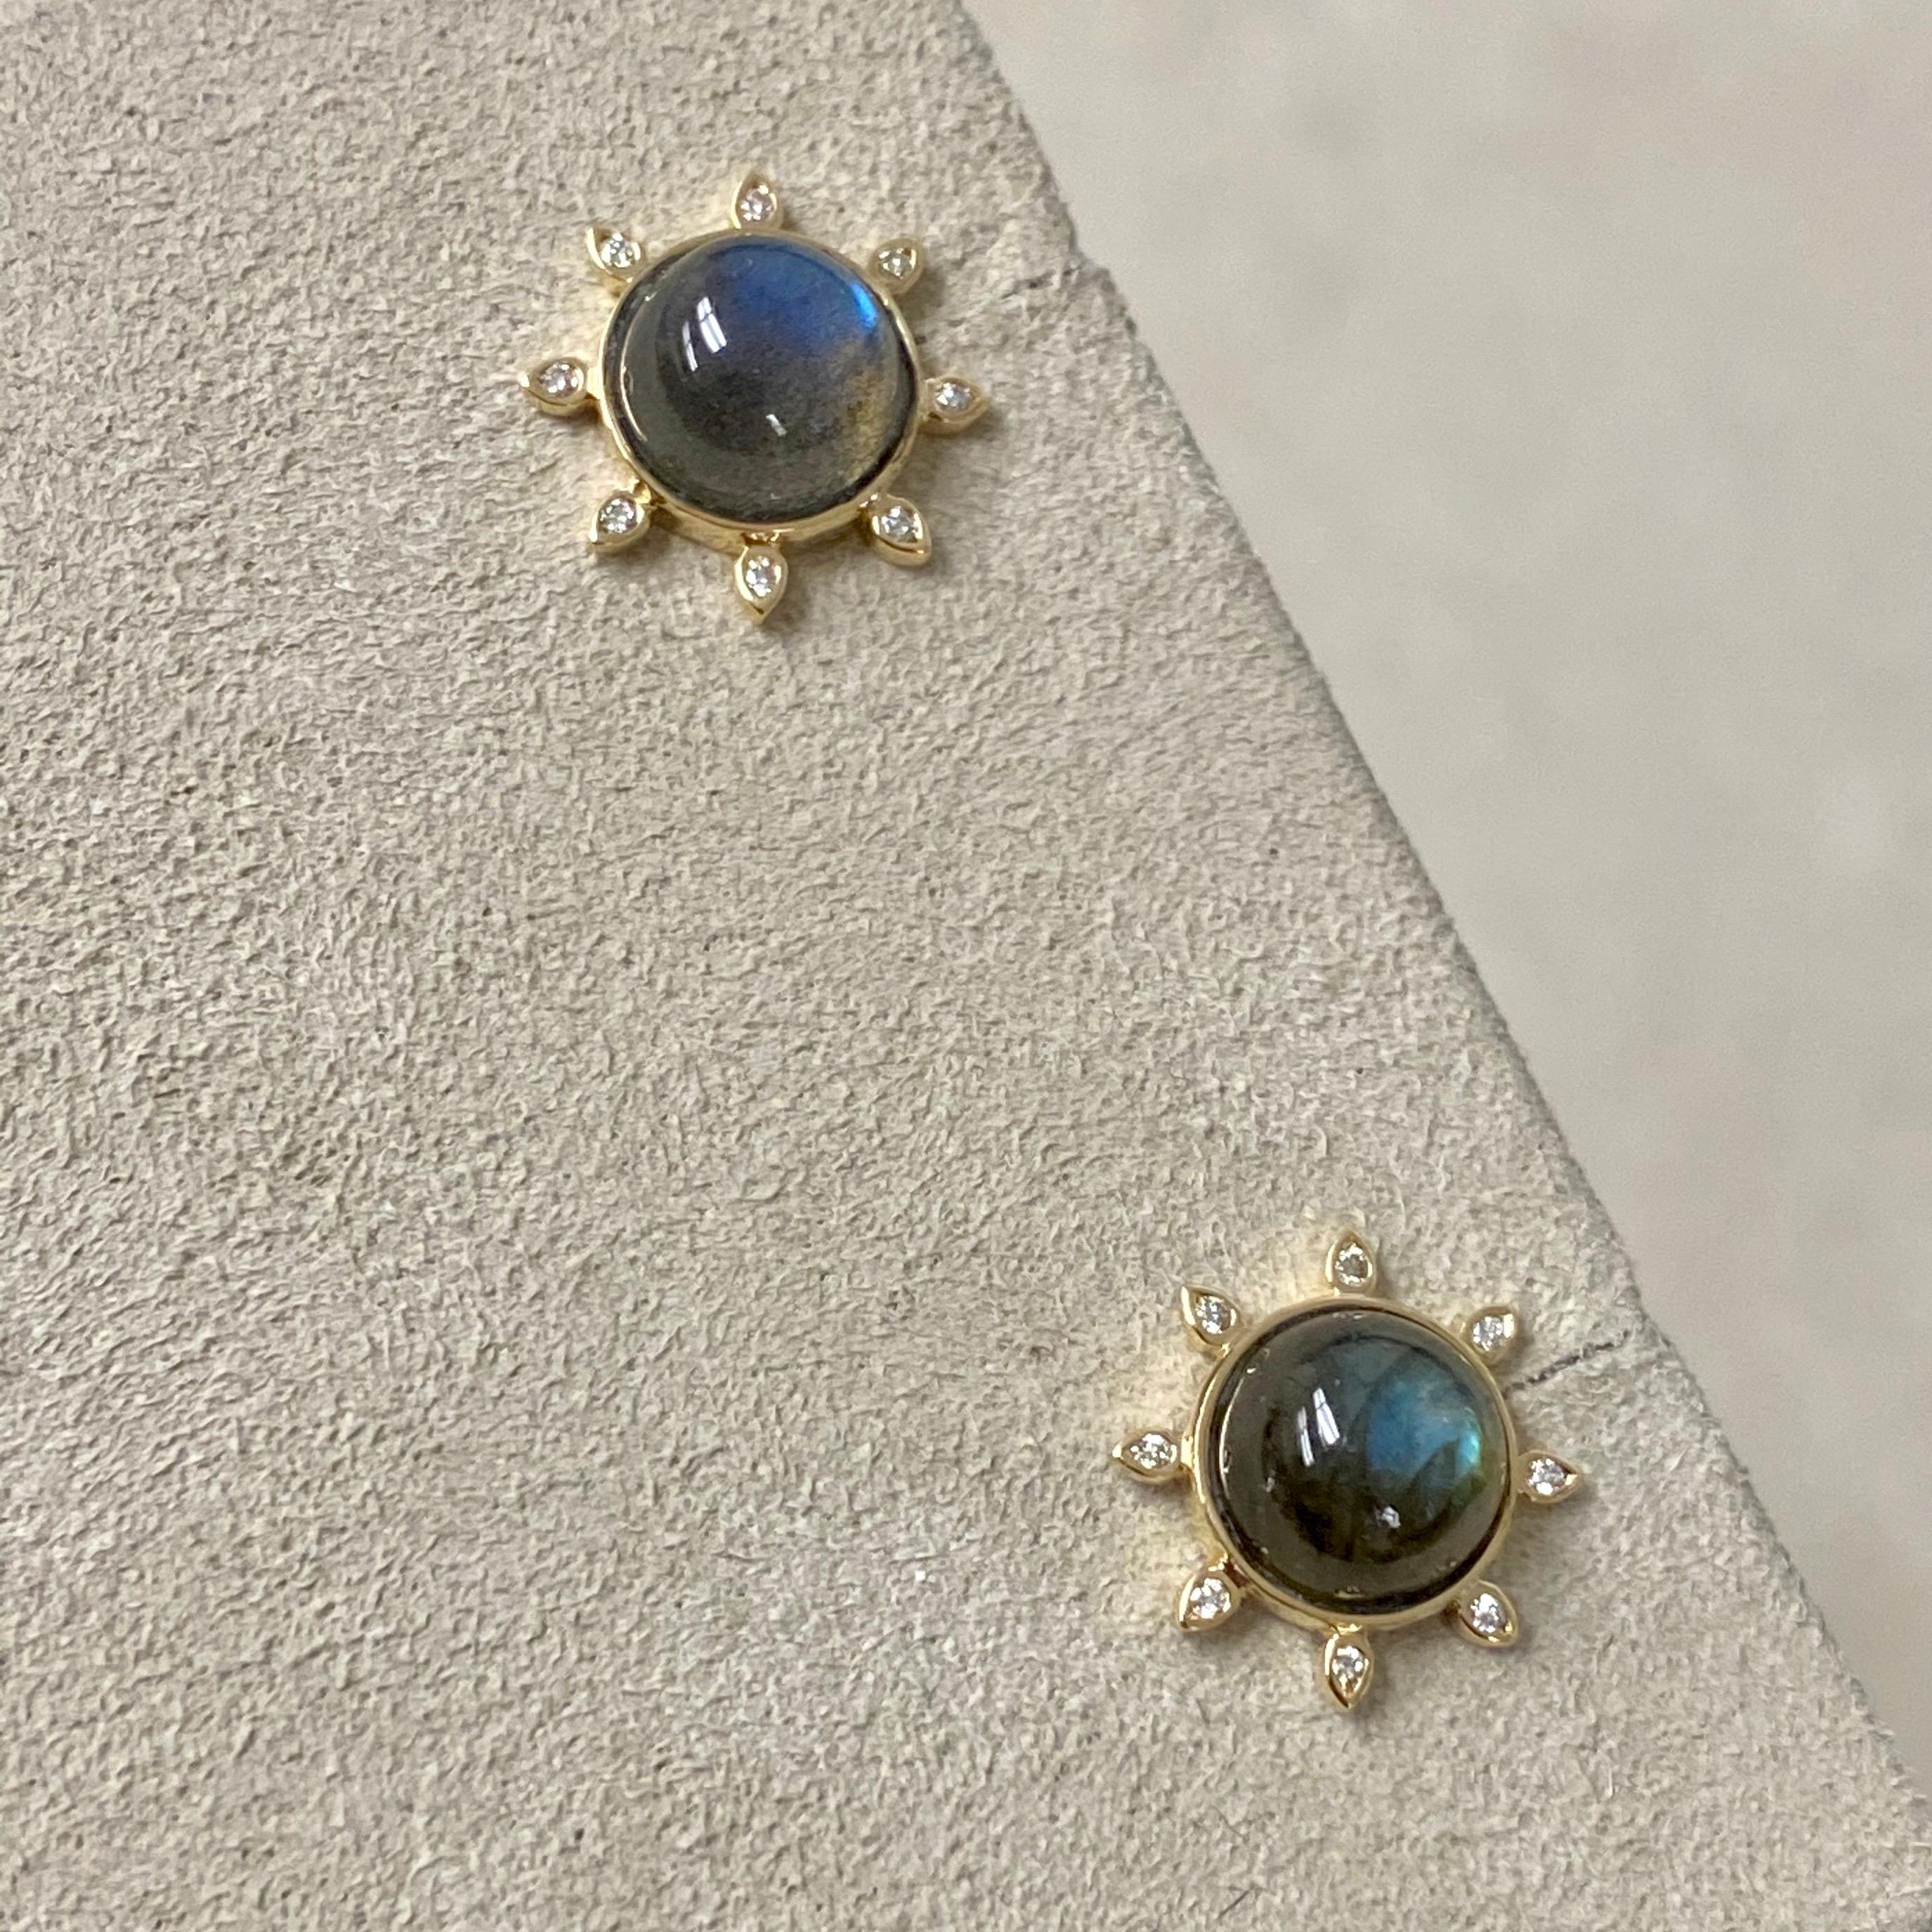 Created in 18 karat yellow gold
Labradorite cabochons 4 cts approx
Champagne diamonds 0.10 ct approx
Limited edition


About the Designers ~ Dharmesh & Namrata

Drawing inspiration from little things, Dharmesh & Namrata Kothari have created an